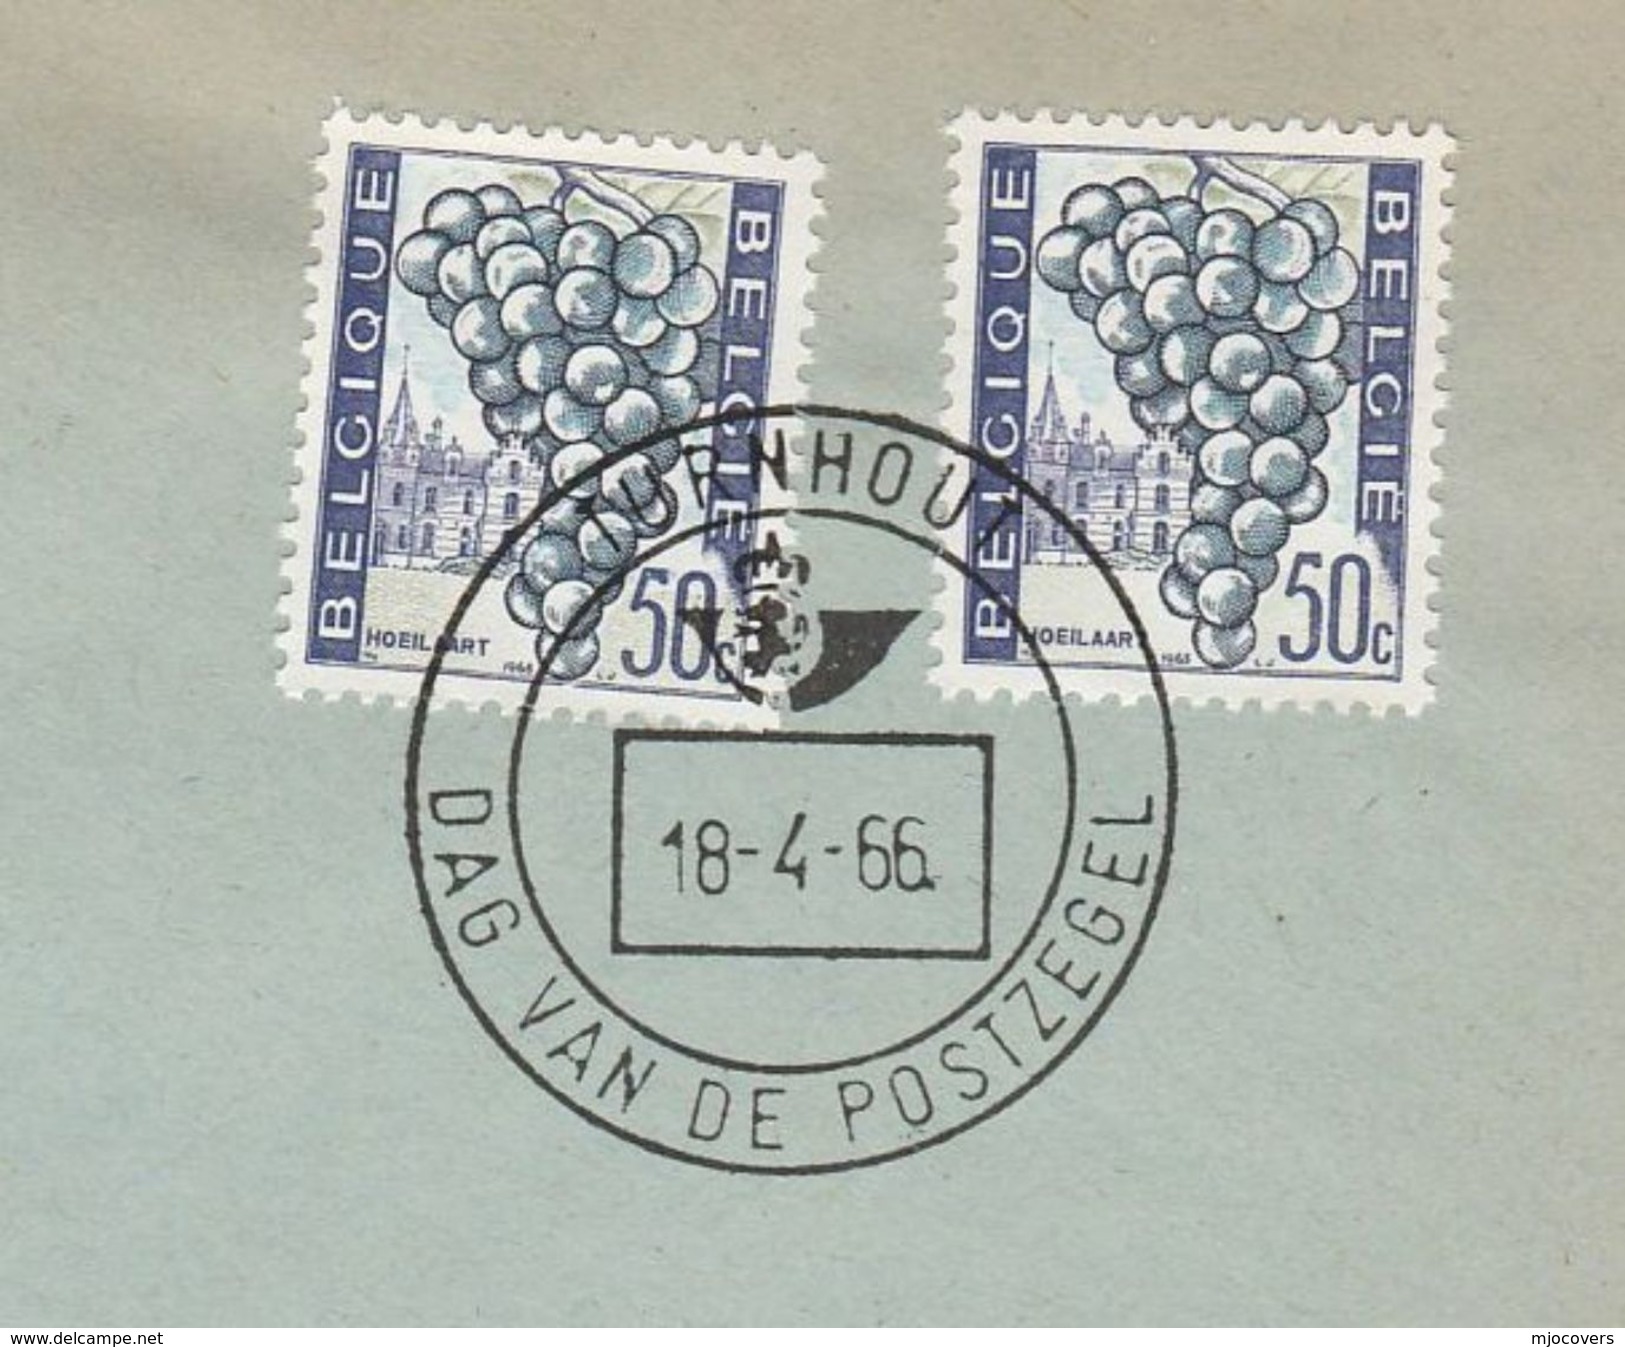 1966  BELGIUM COVER EVENT Pmk TORNHOUT STAMP DAY ,2x 50c GRAPES Stamps Fruit - Fruits